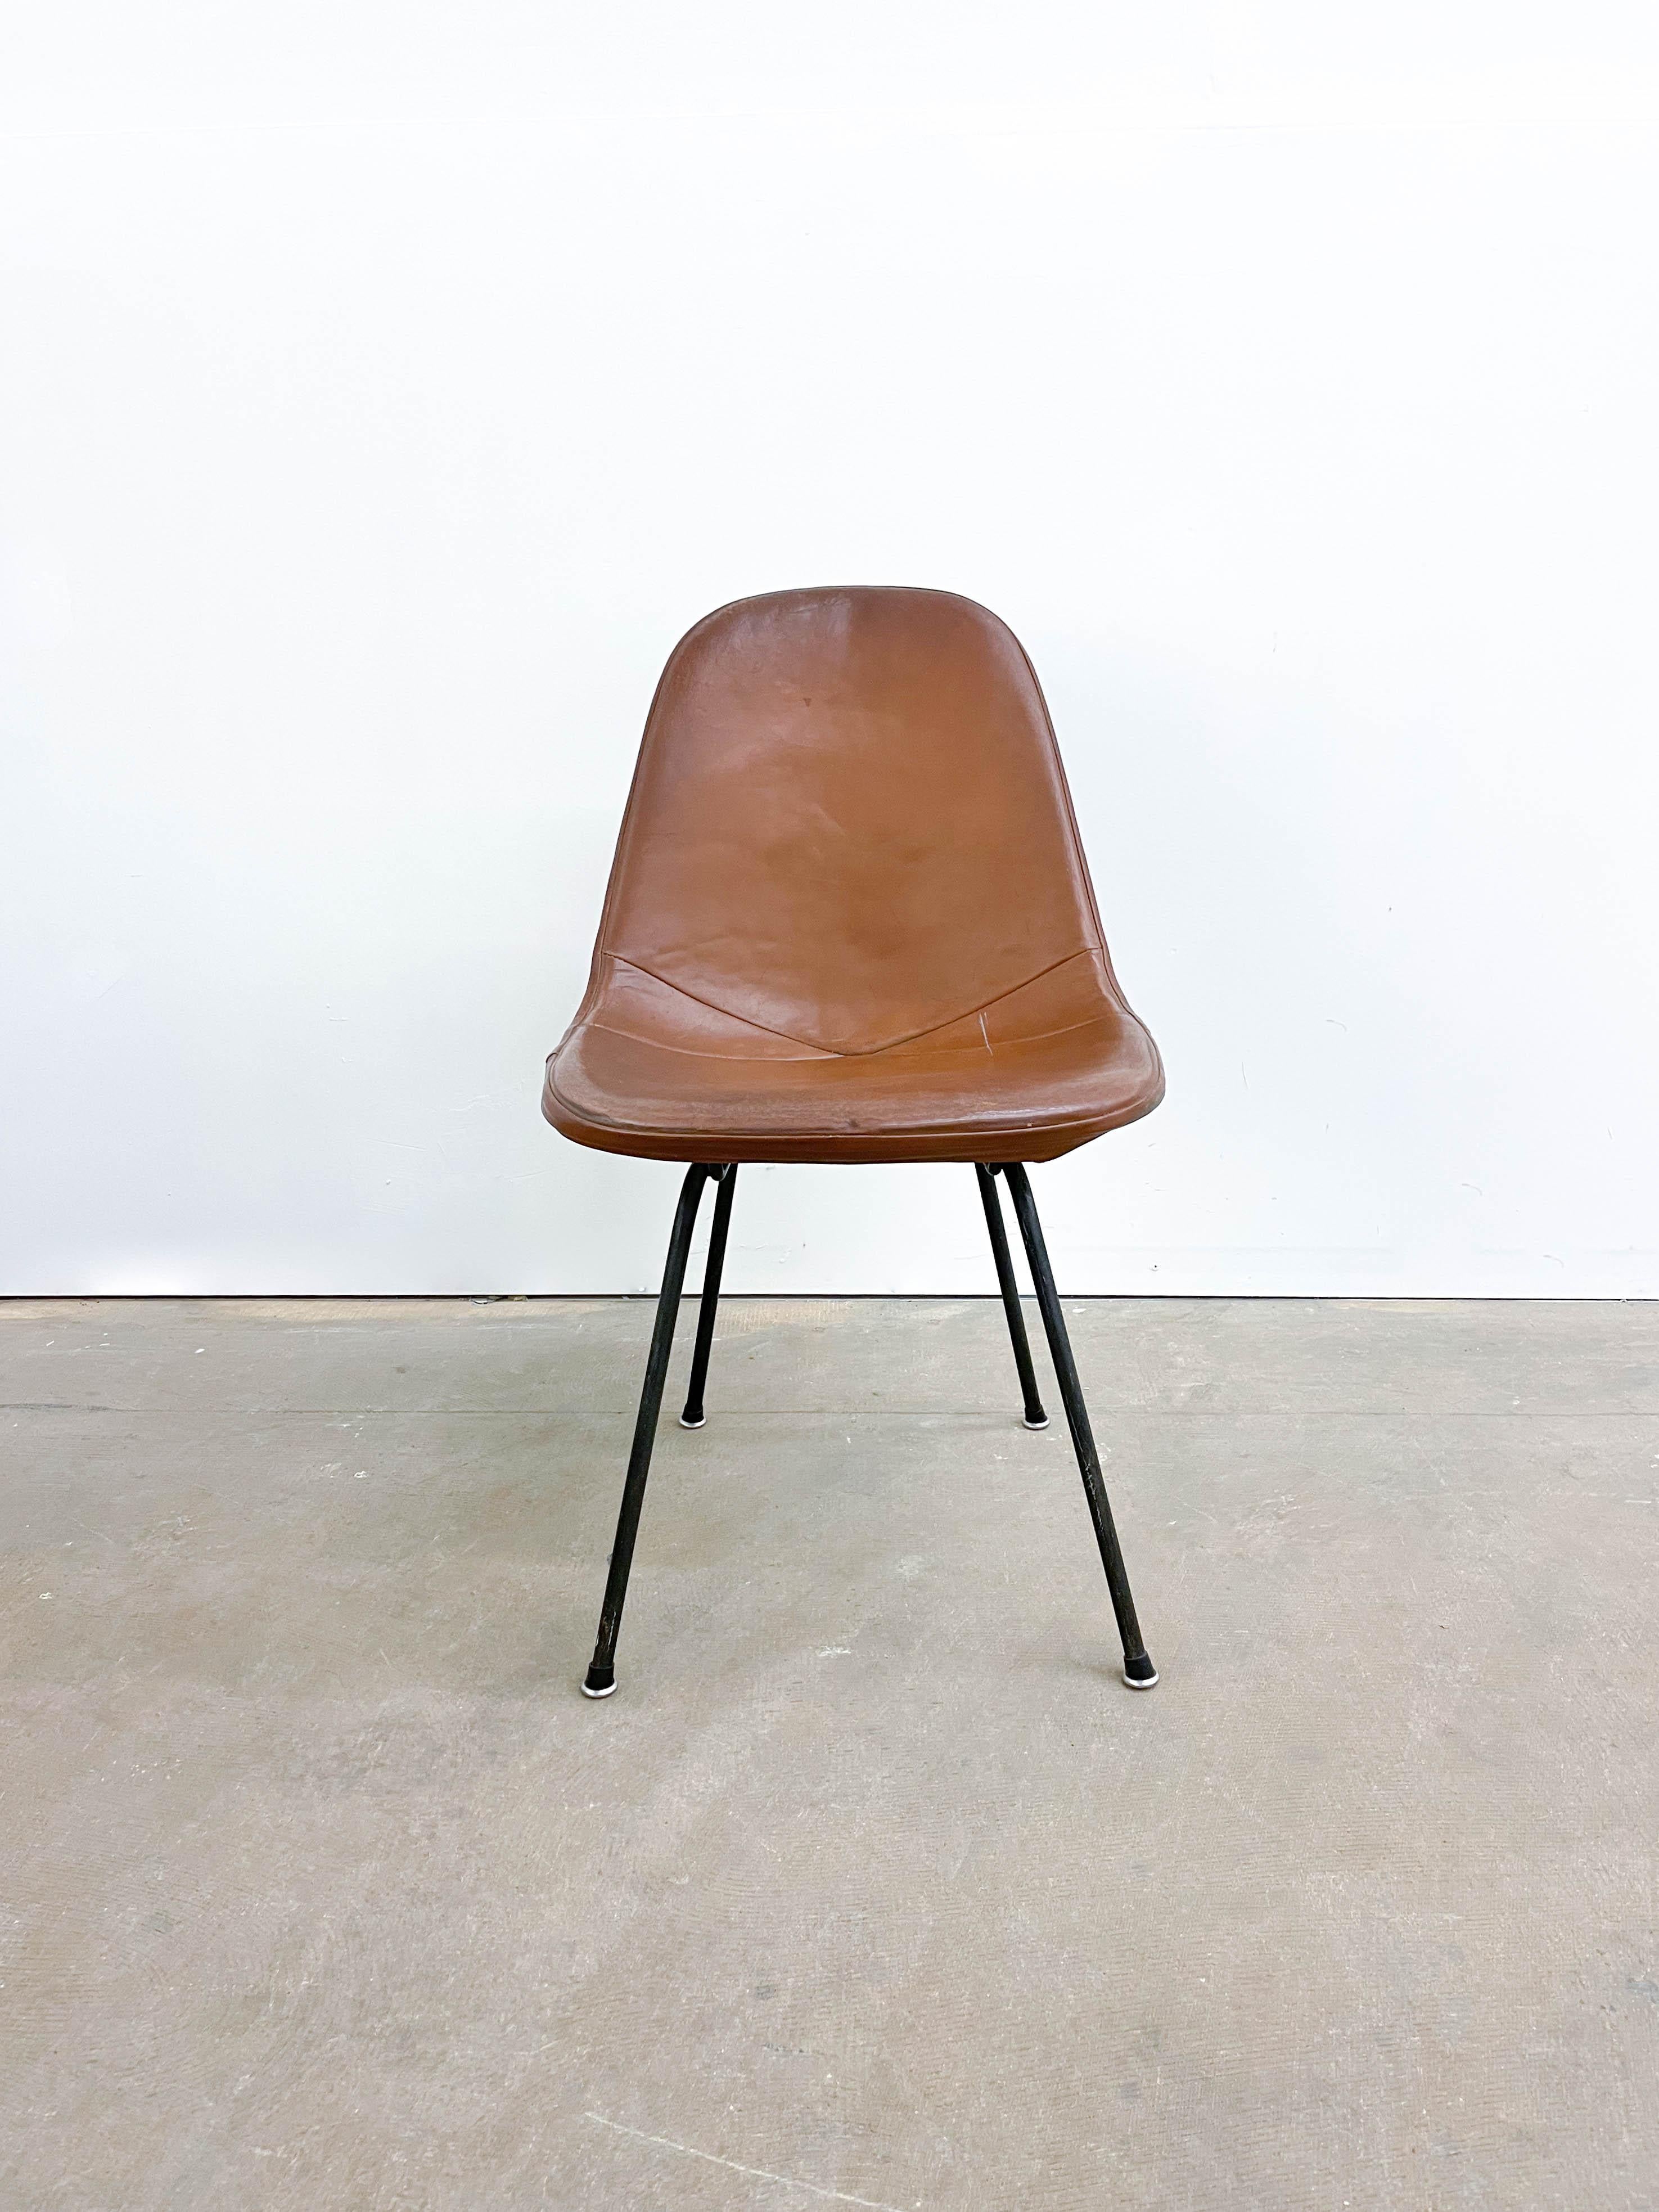 This is an attractive leather-covered wire chair designed by Ray and Charles Eames and made by Herman Miller in the 1960s. The first thing you will notice is the beautifully worn leather -- sometimes called the postman's bag for its great patina and